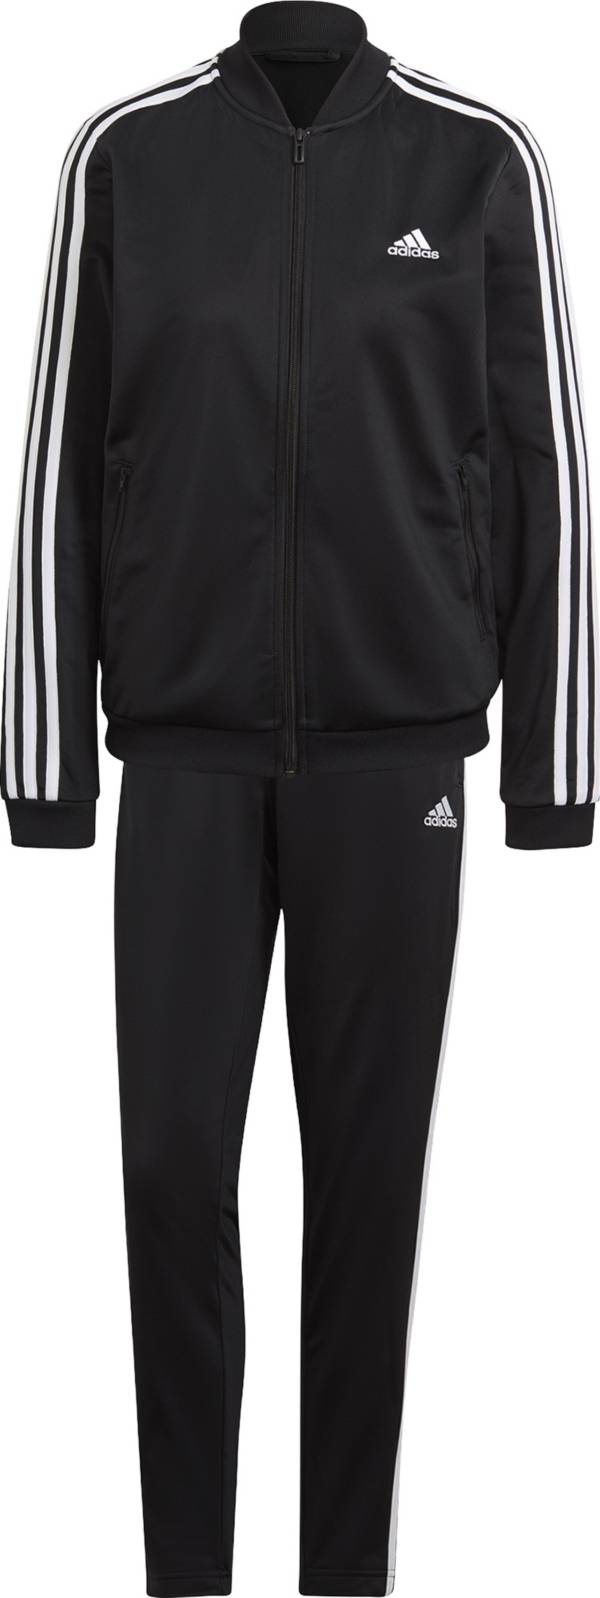 adidas Women's 3-Stripes Tracksuit | Dick's Sporting Goods